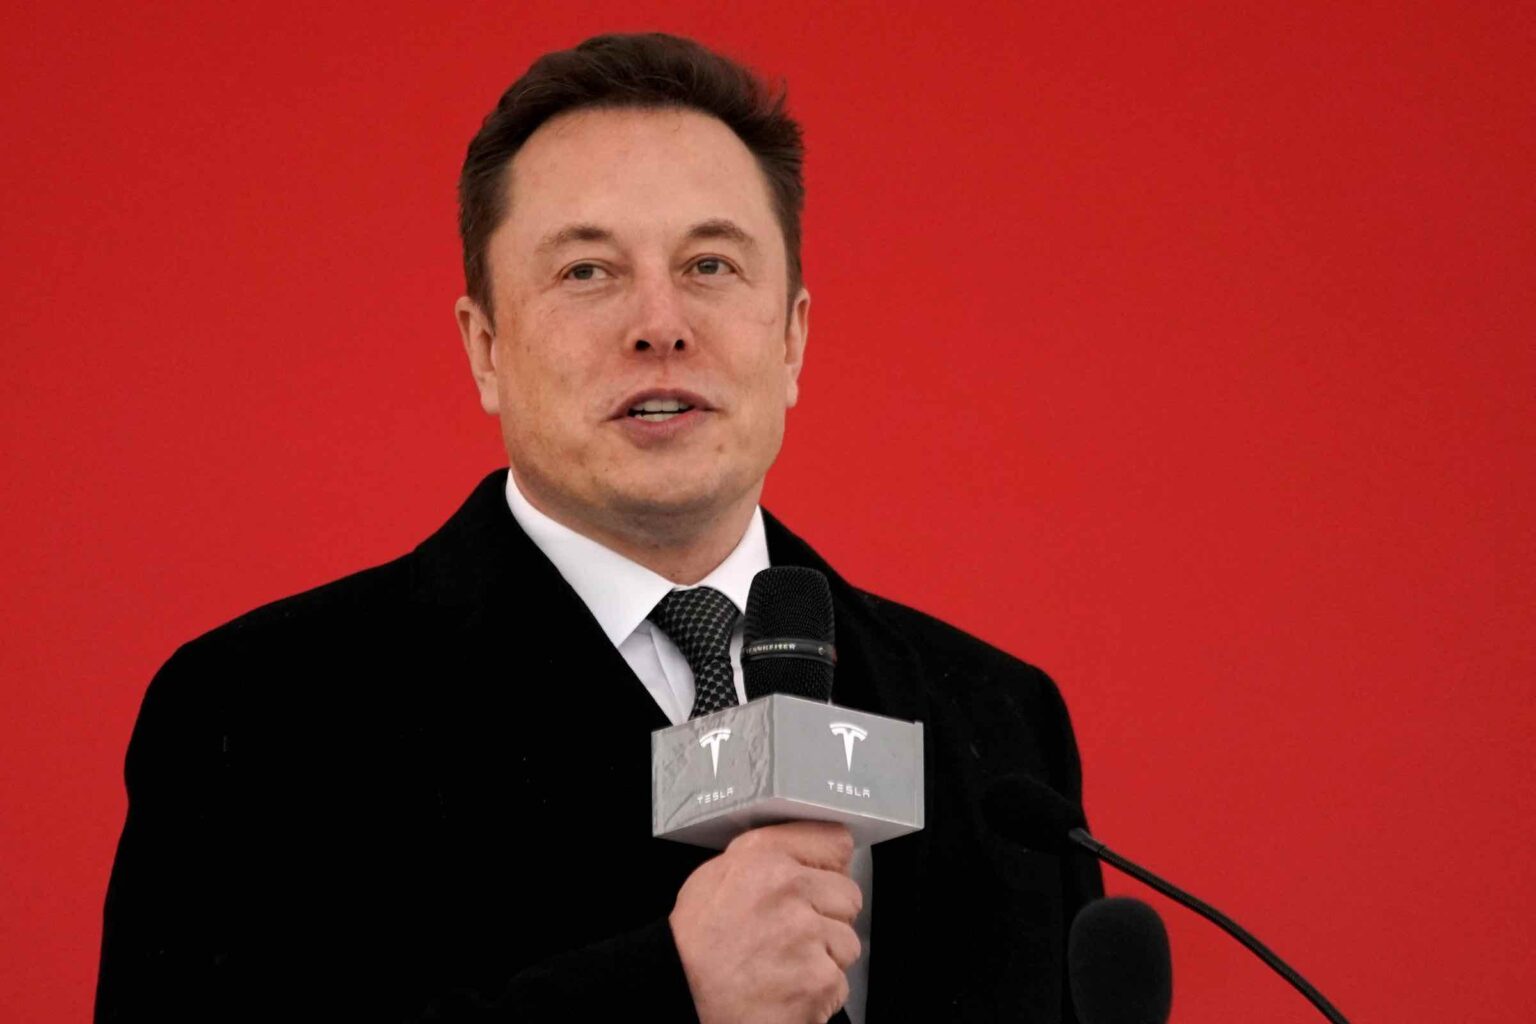 Some people admire him, others find him despicable, but who's Elon Musk? Here's all you need to know about this internationally known businessman.